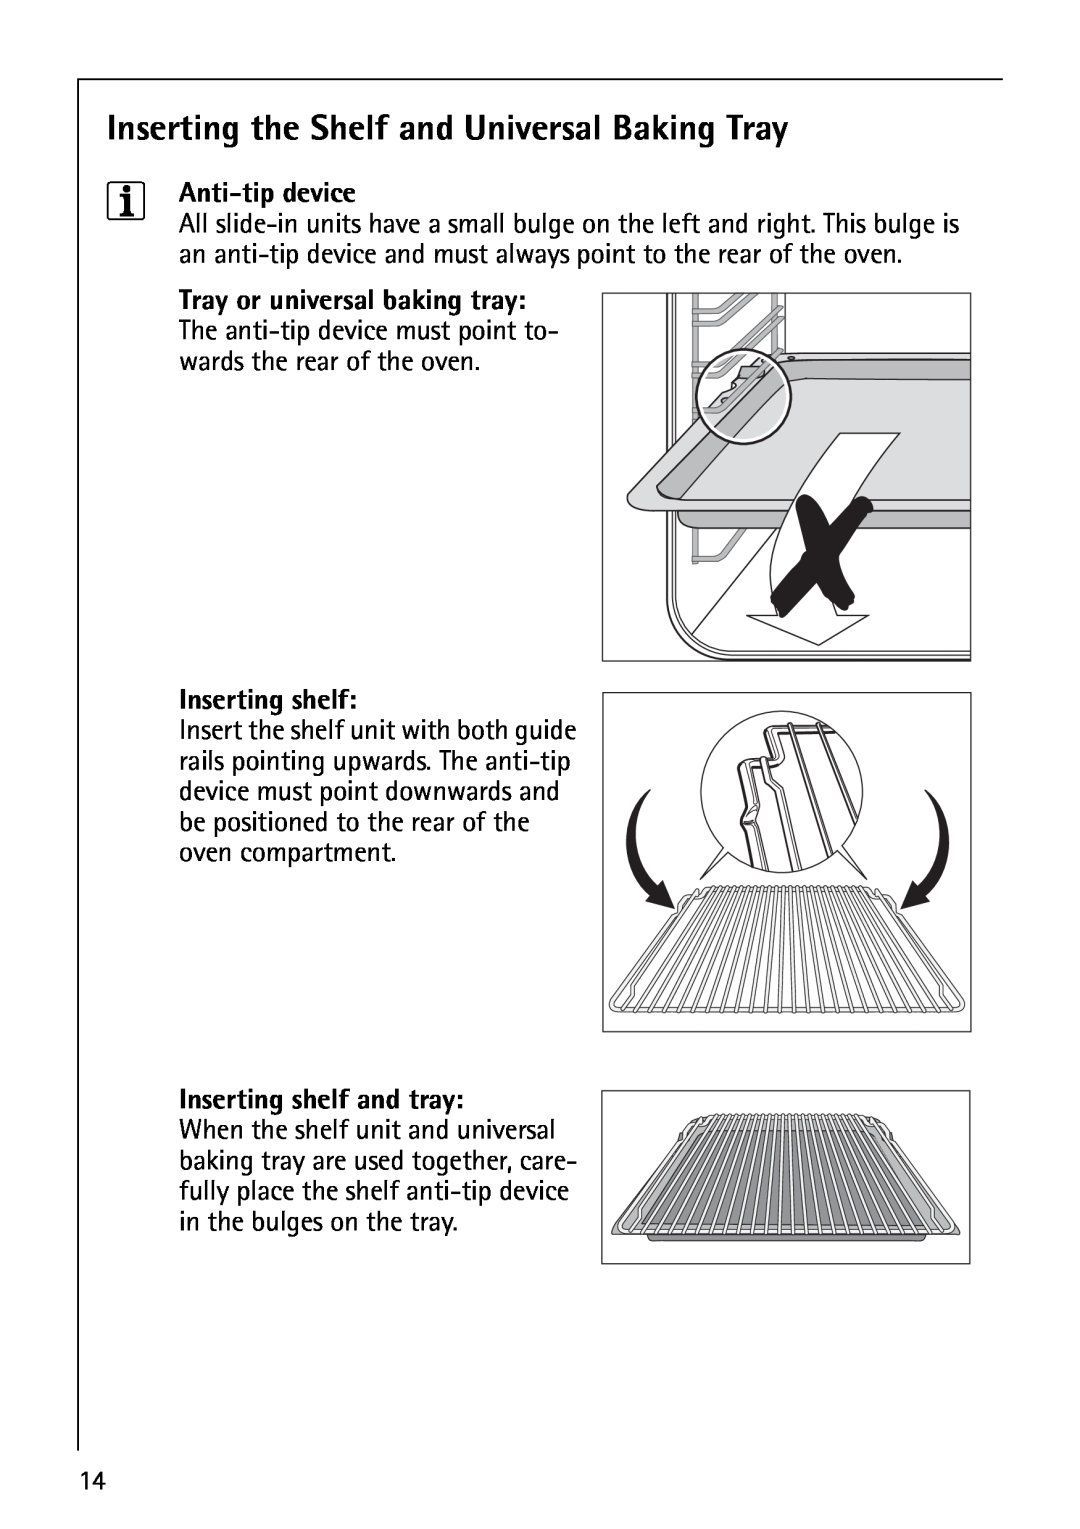 Electrolux B1100-3 manual Inserting the Shelf and Universal Baking Tray, Anti-tip device, Inserting shelf 